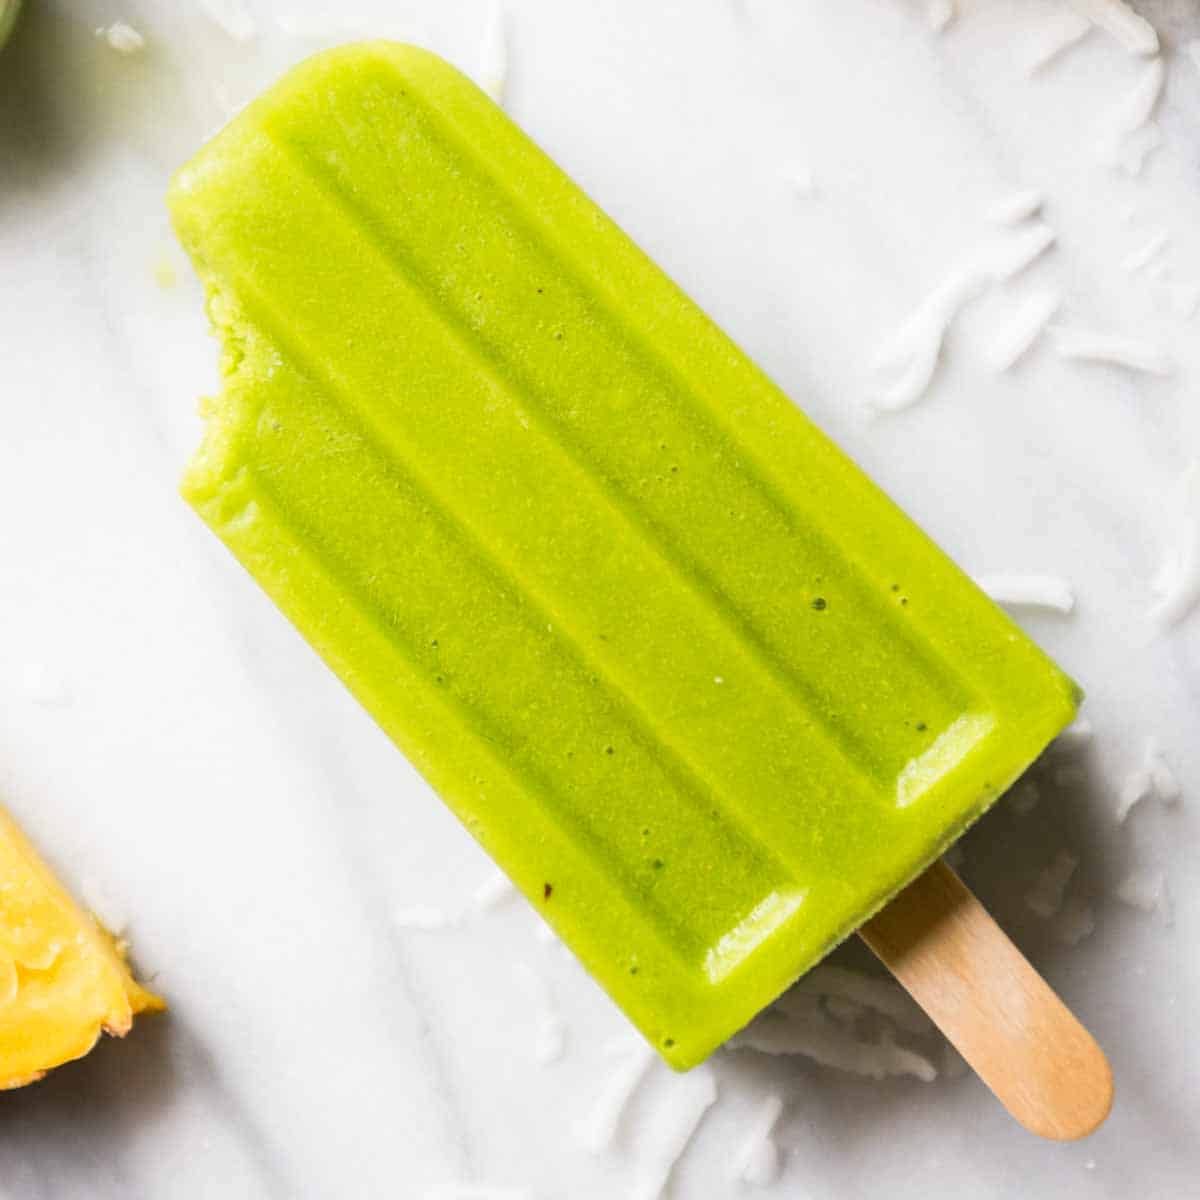 https://simplegreensmoothies.com/wp-content/uploads/smoothie-popsicles-2.jpg